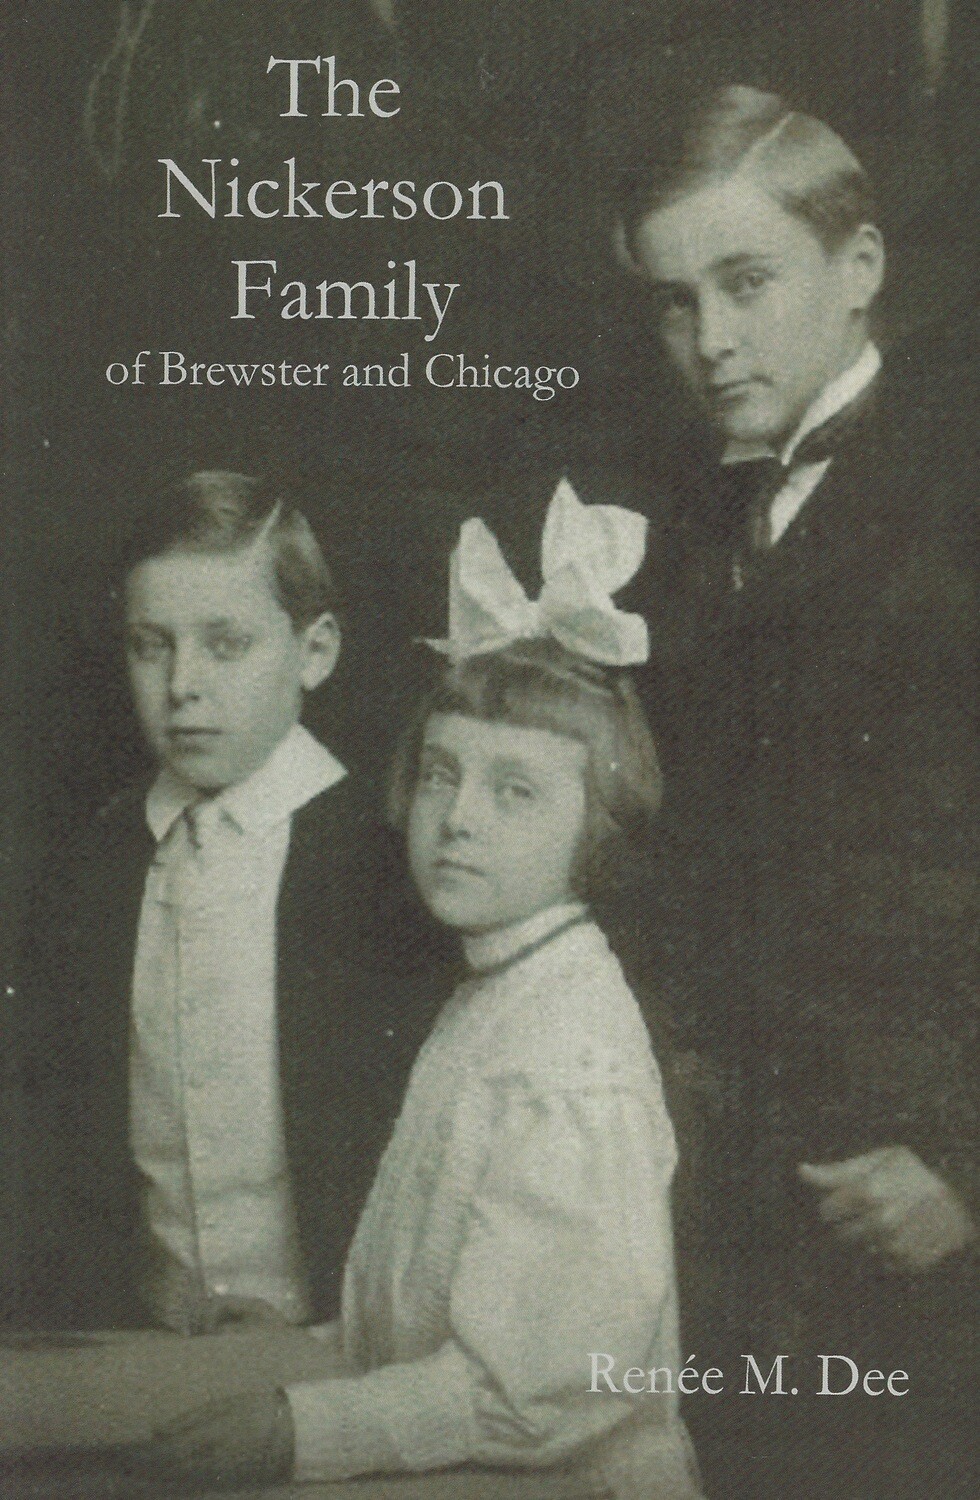 The Nickerson Family of Brewster and Chicago